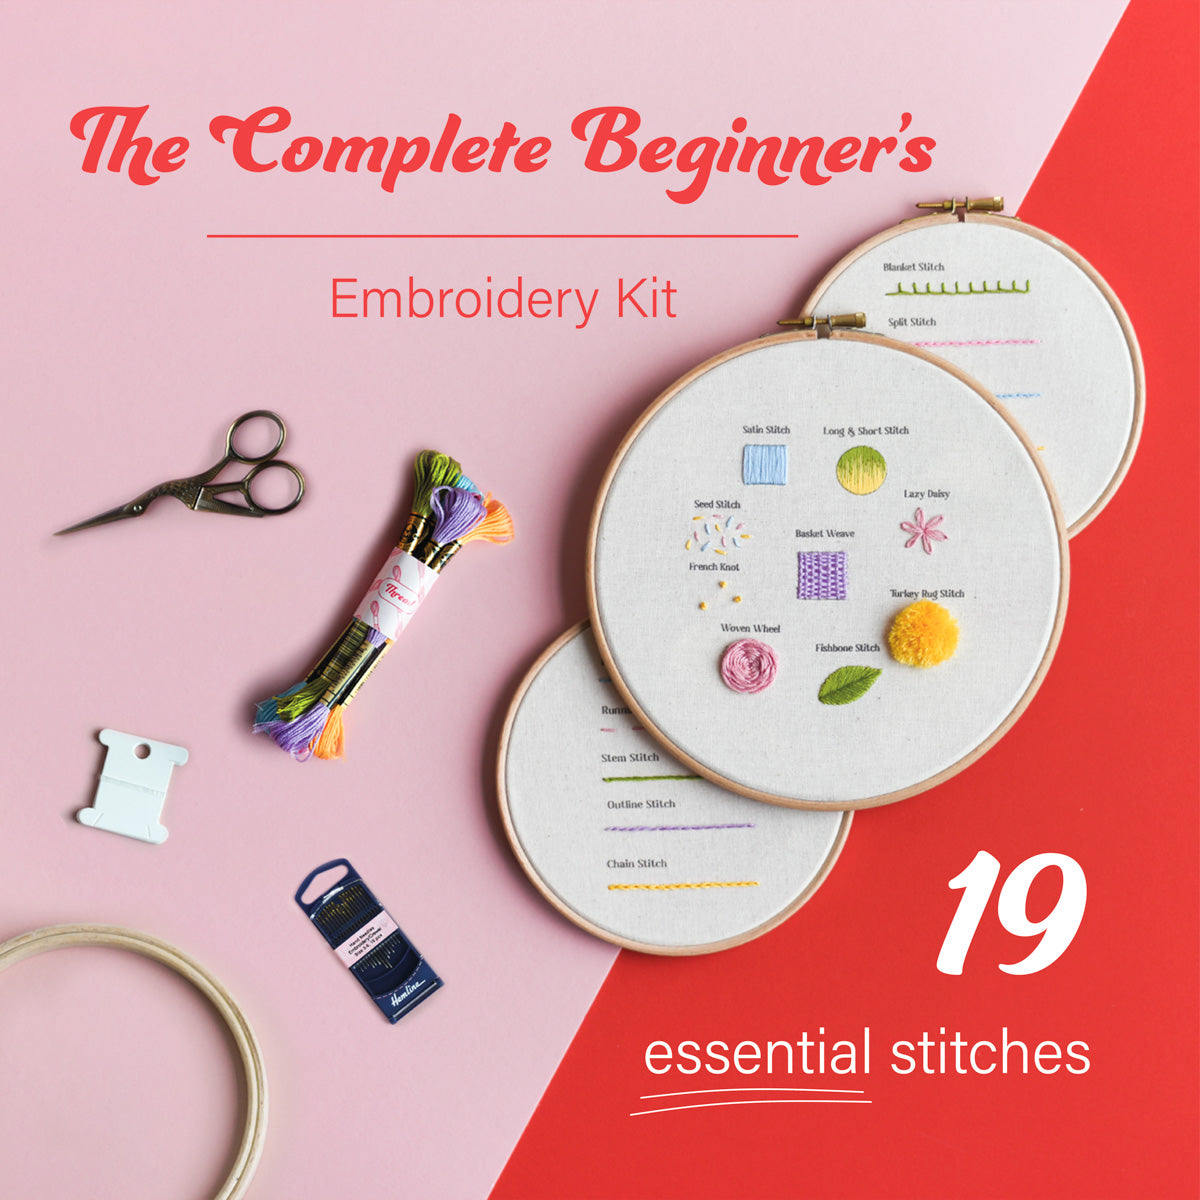 The Complete Beginner's Embroidery Kit